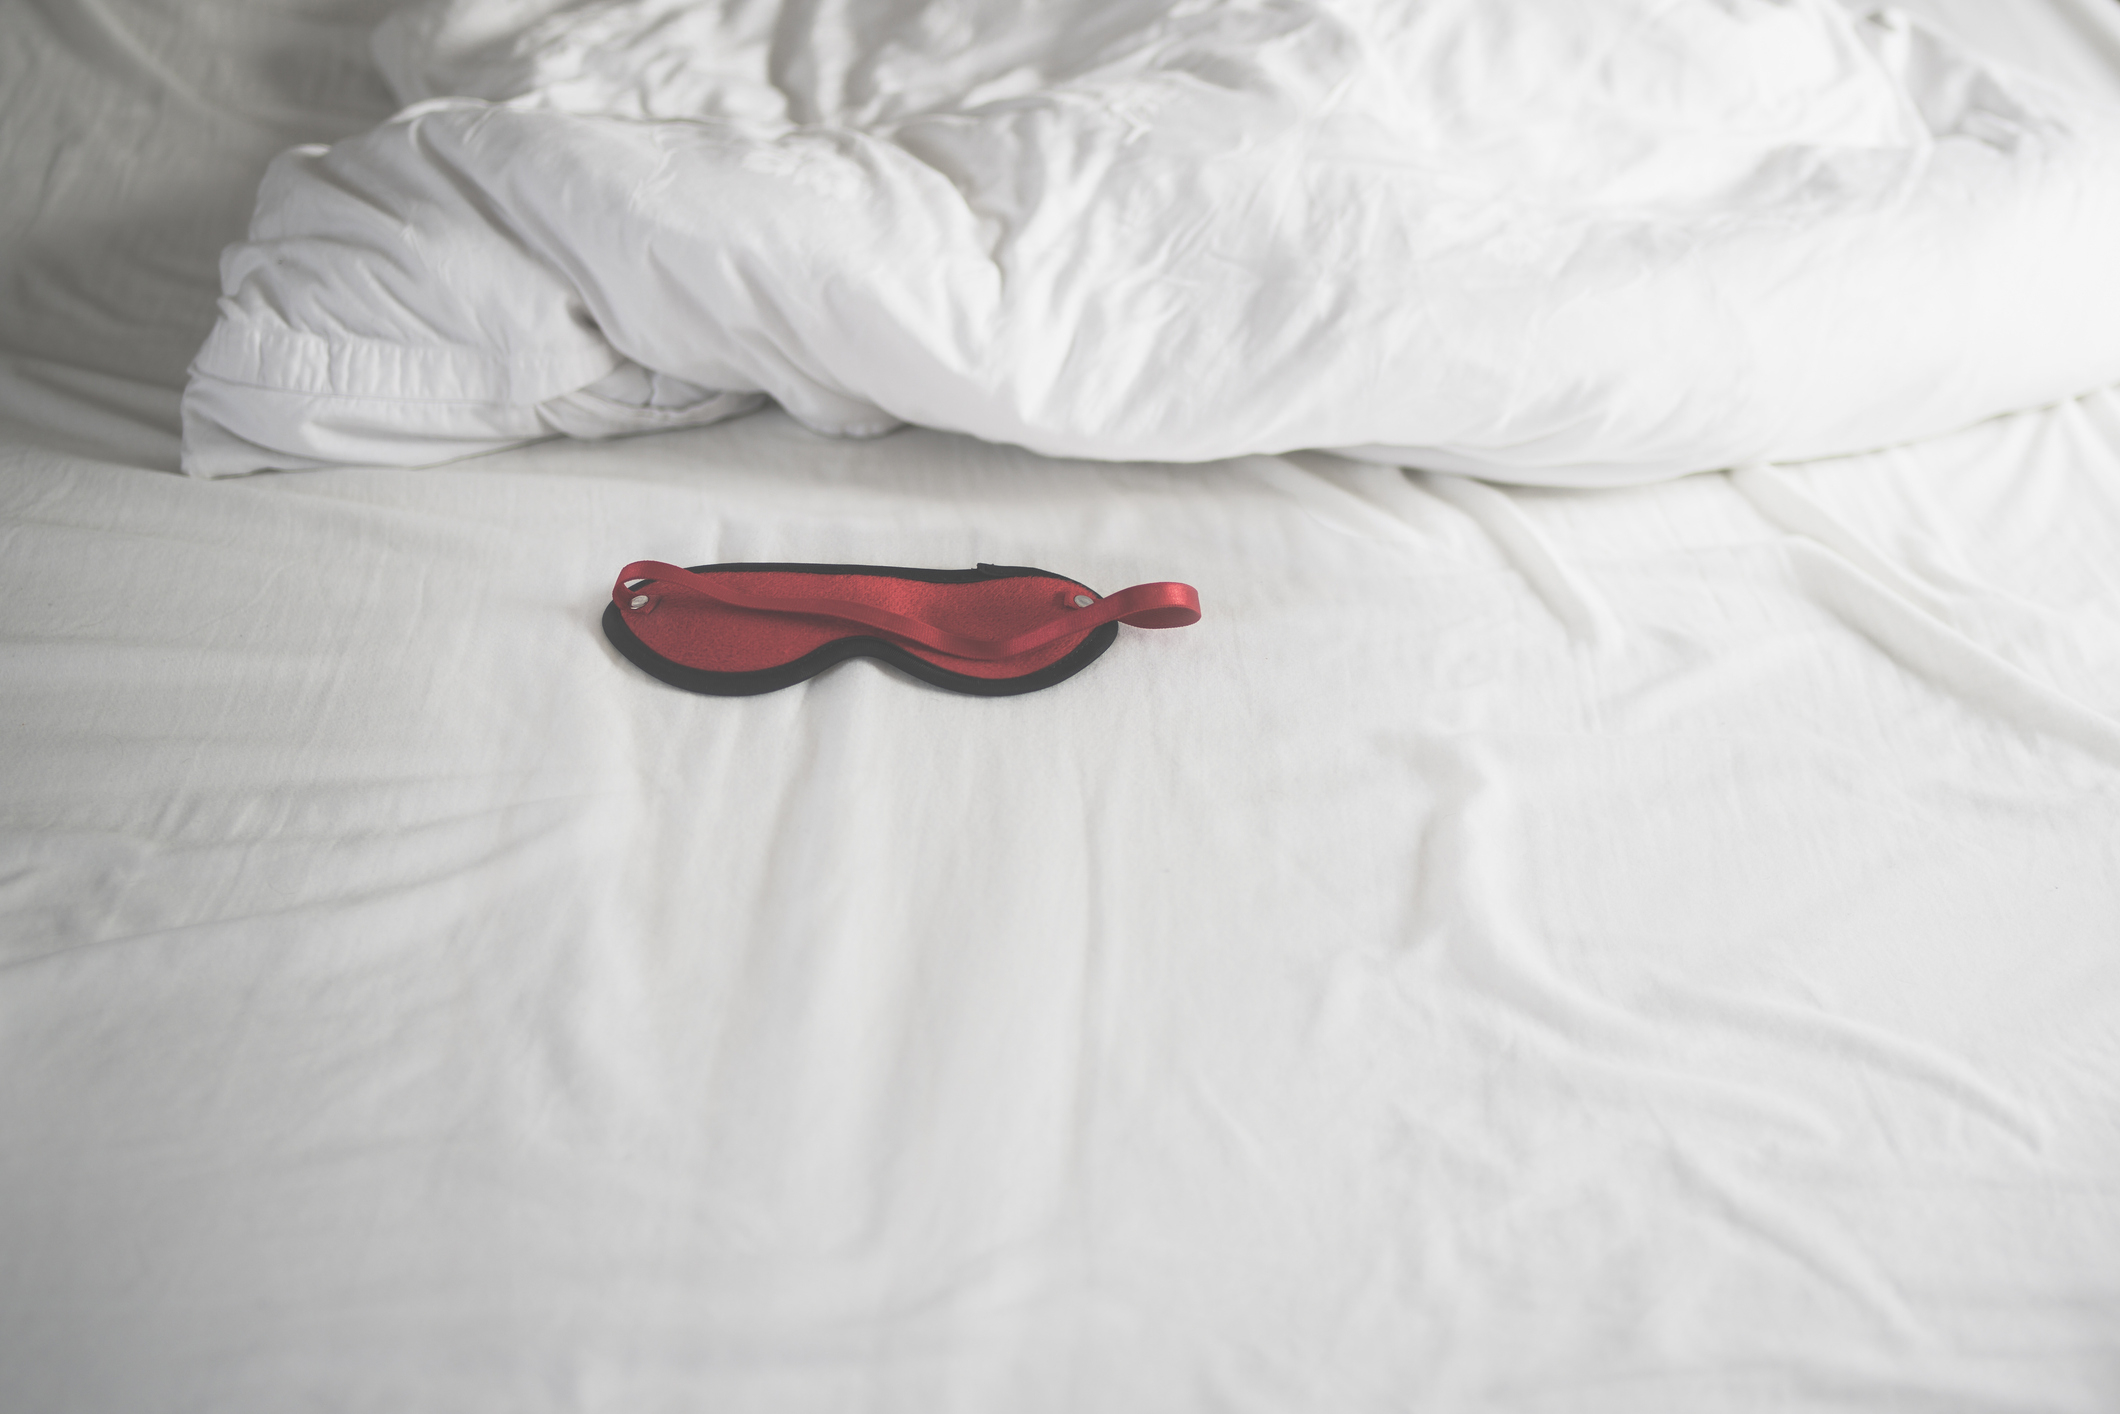 Red sleep mask on a white bed, conveying intimacy or the concept of sleep